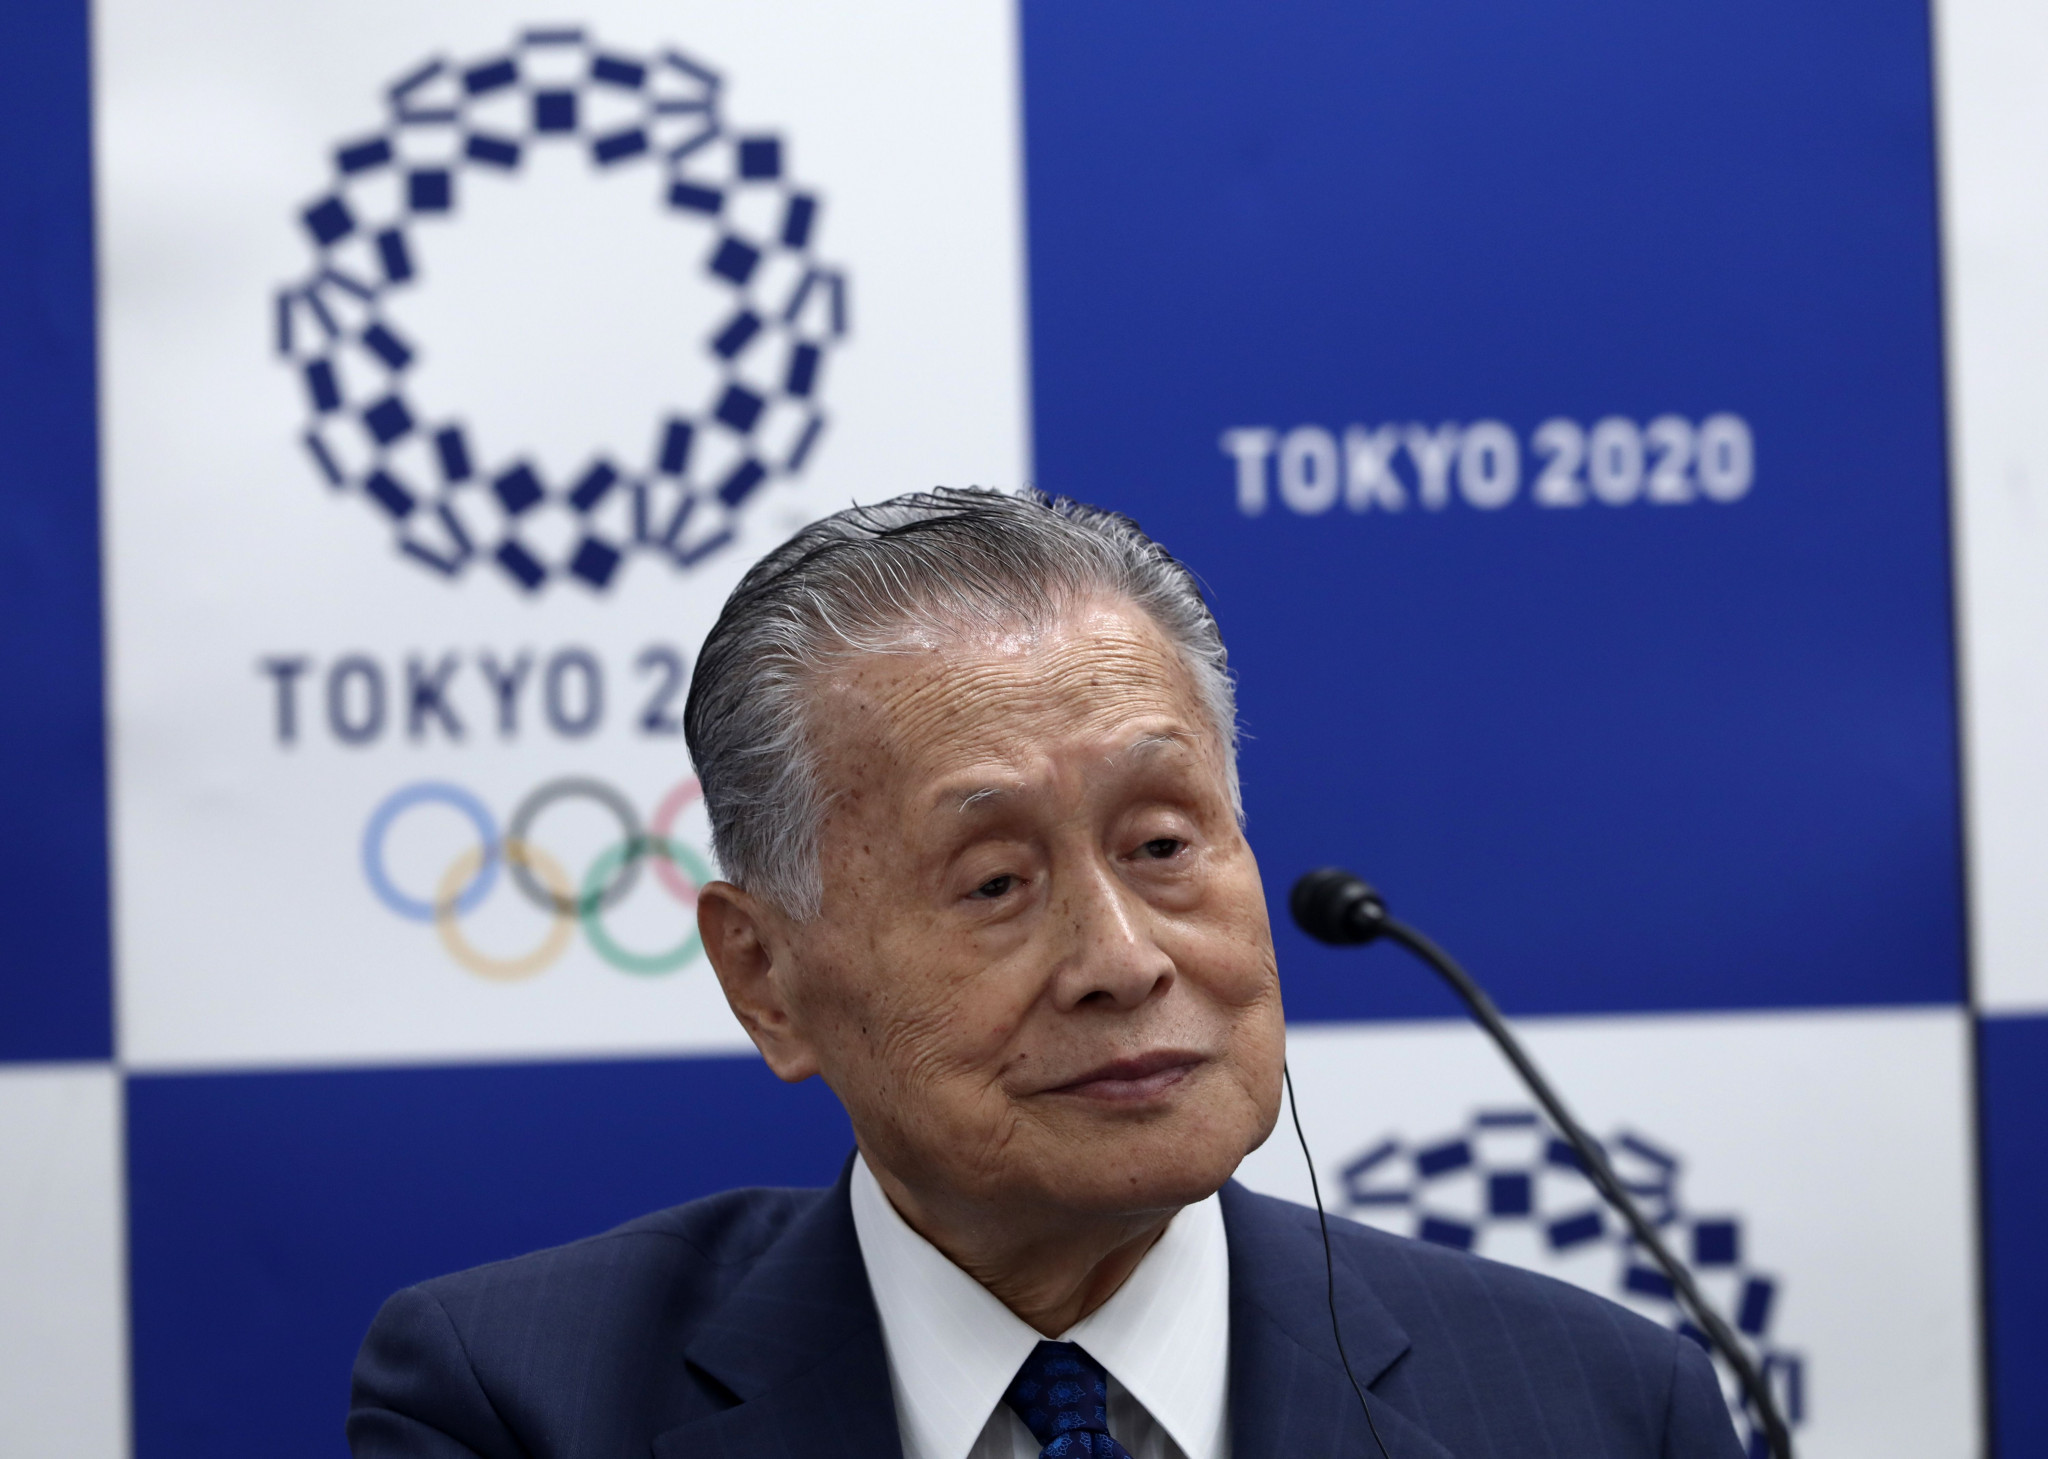 The daylight saving idea came from Prime Minister Yoshiro Mori, the President of the Tokyo Organising Committee of the Olympic and Paralympic Games ©Getty Images